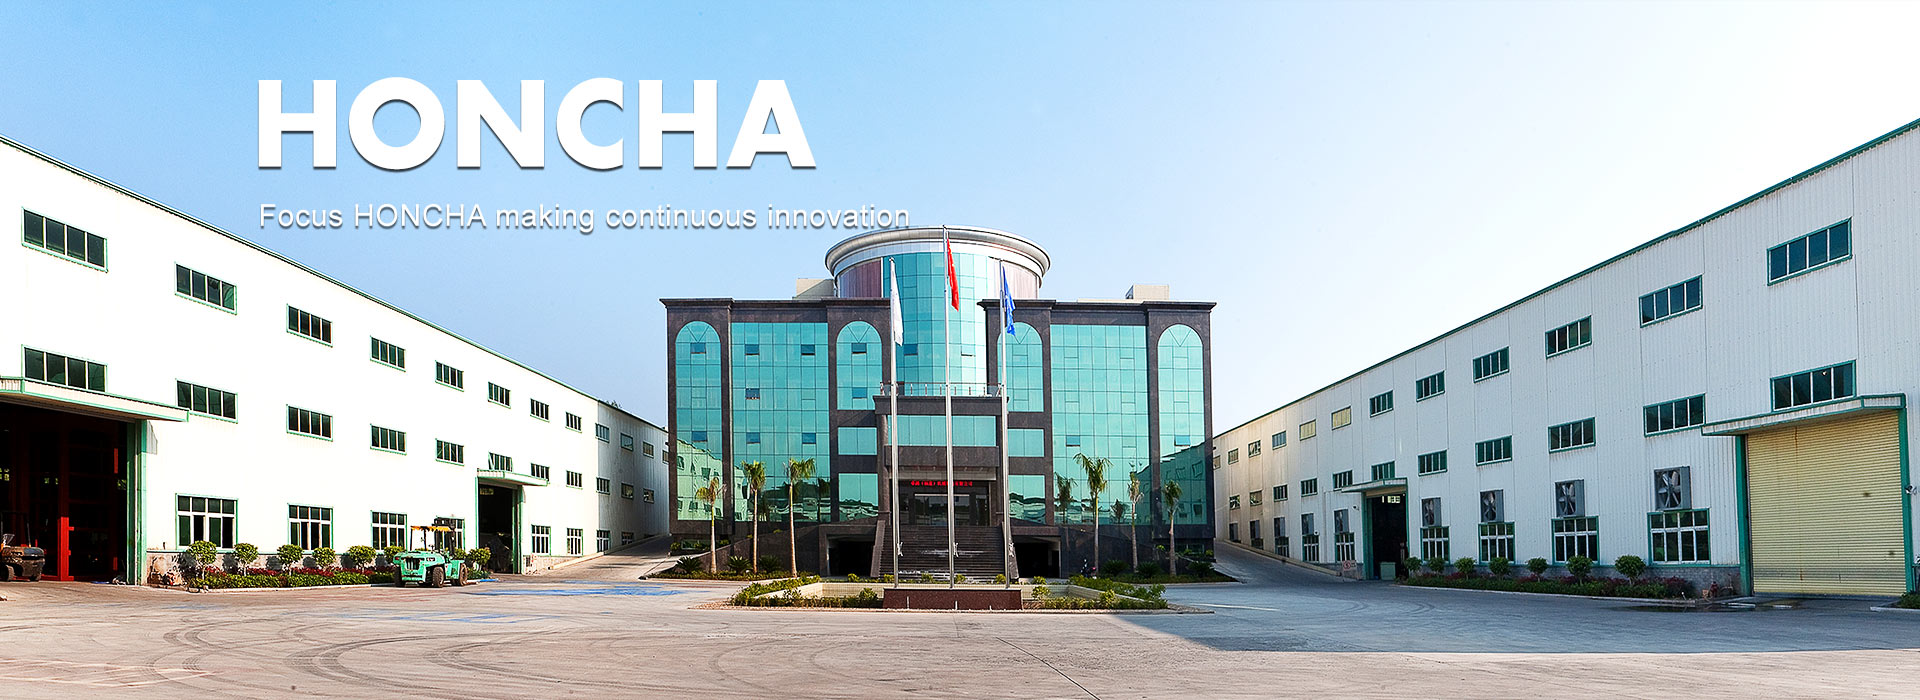 Focus HONCHA make continuous innovation